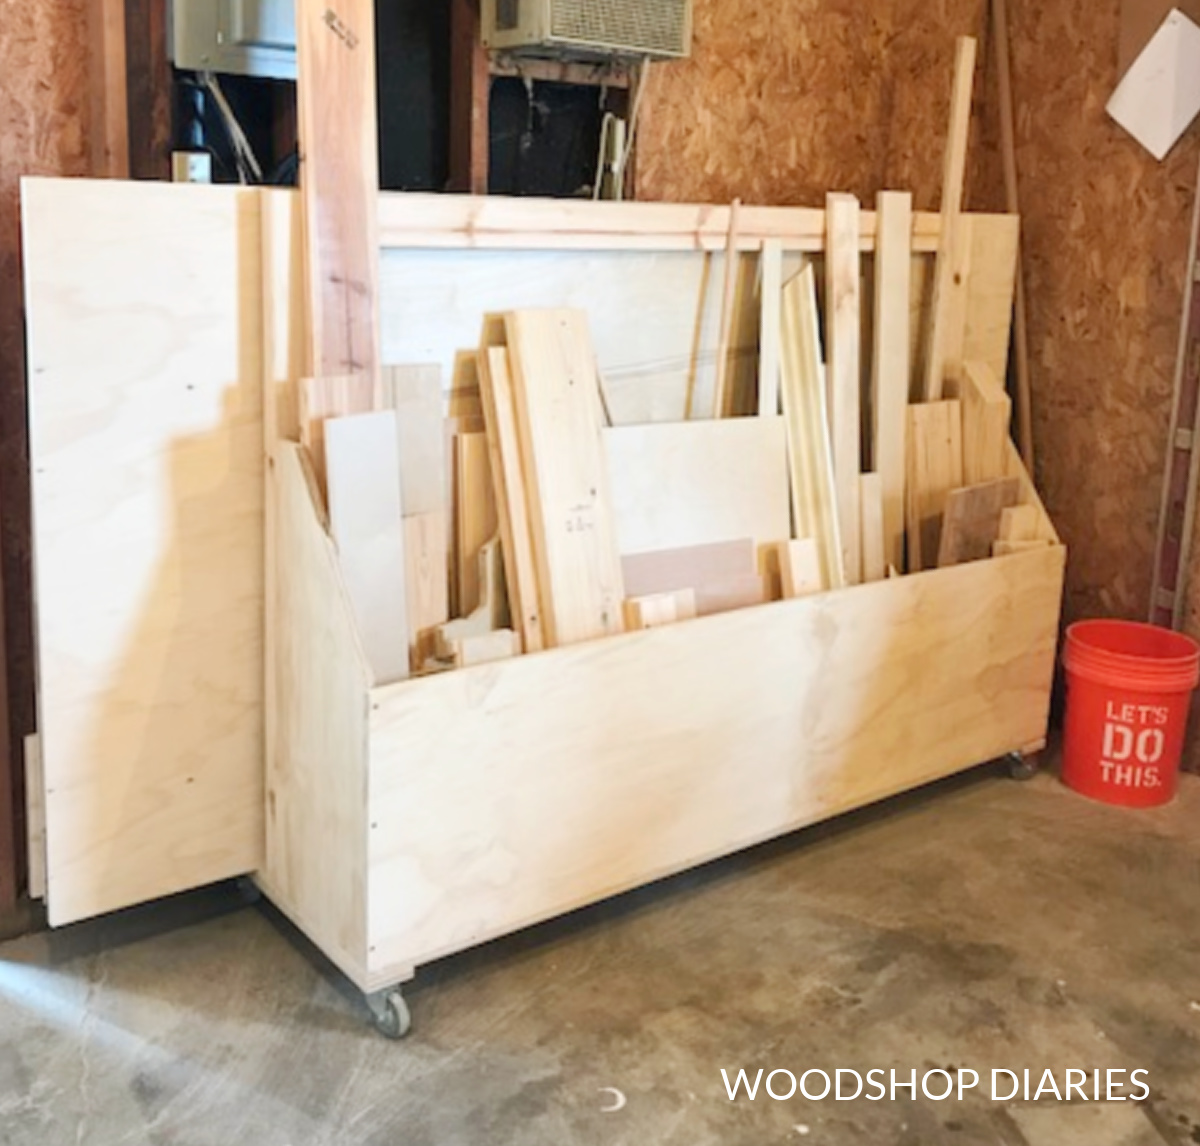 https://www.woodshopdiaries.com/wp-content/uploads/2023/01/Scrap-and-plywood-cart-blog.jpg